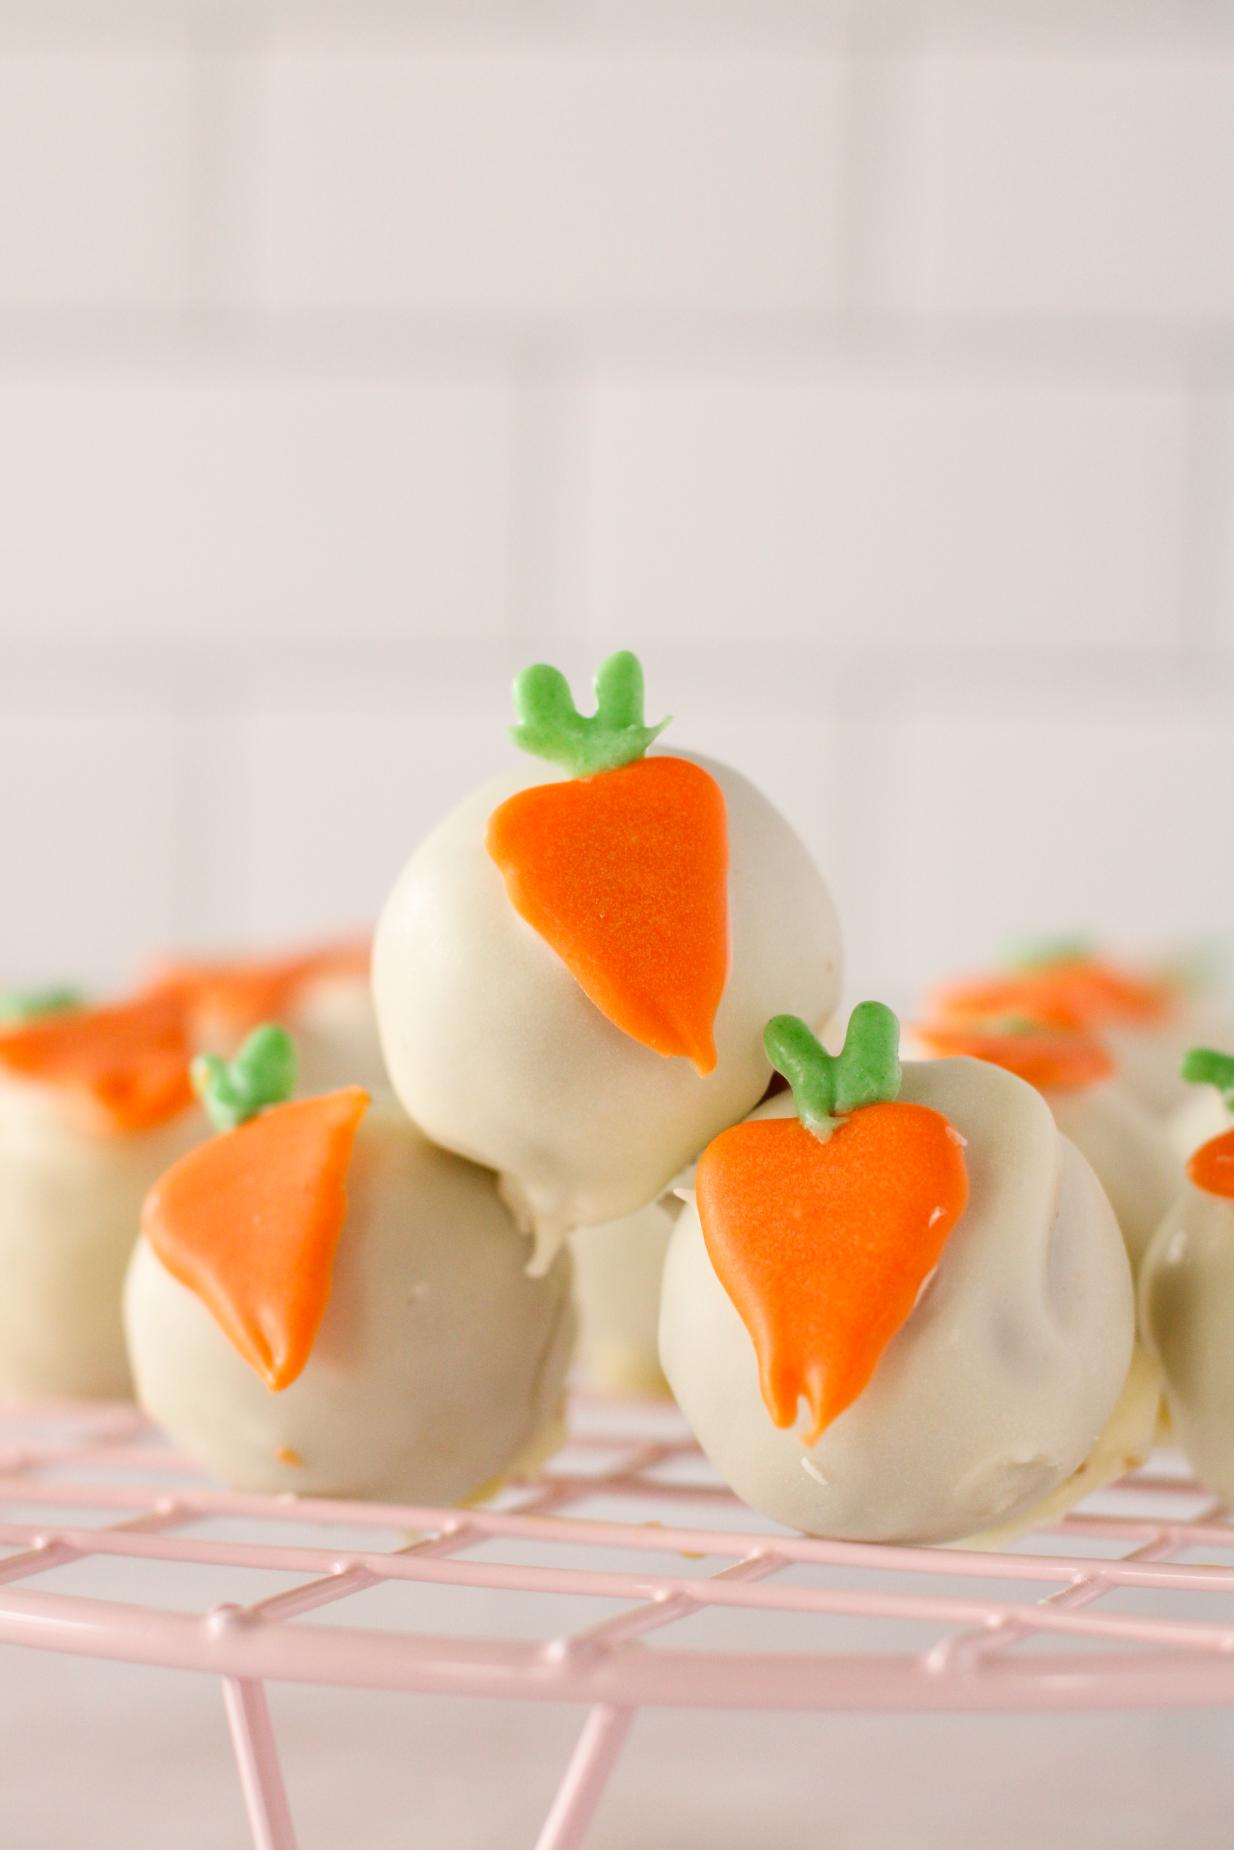 Front on image of a pile of 4 carrot cake pop balls with little carrot decorations